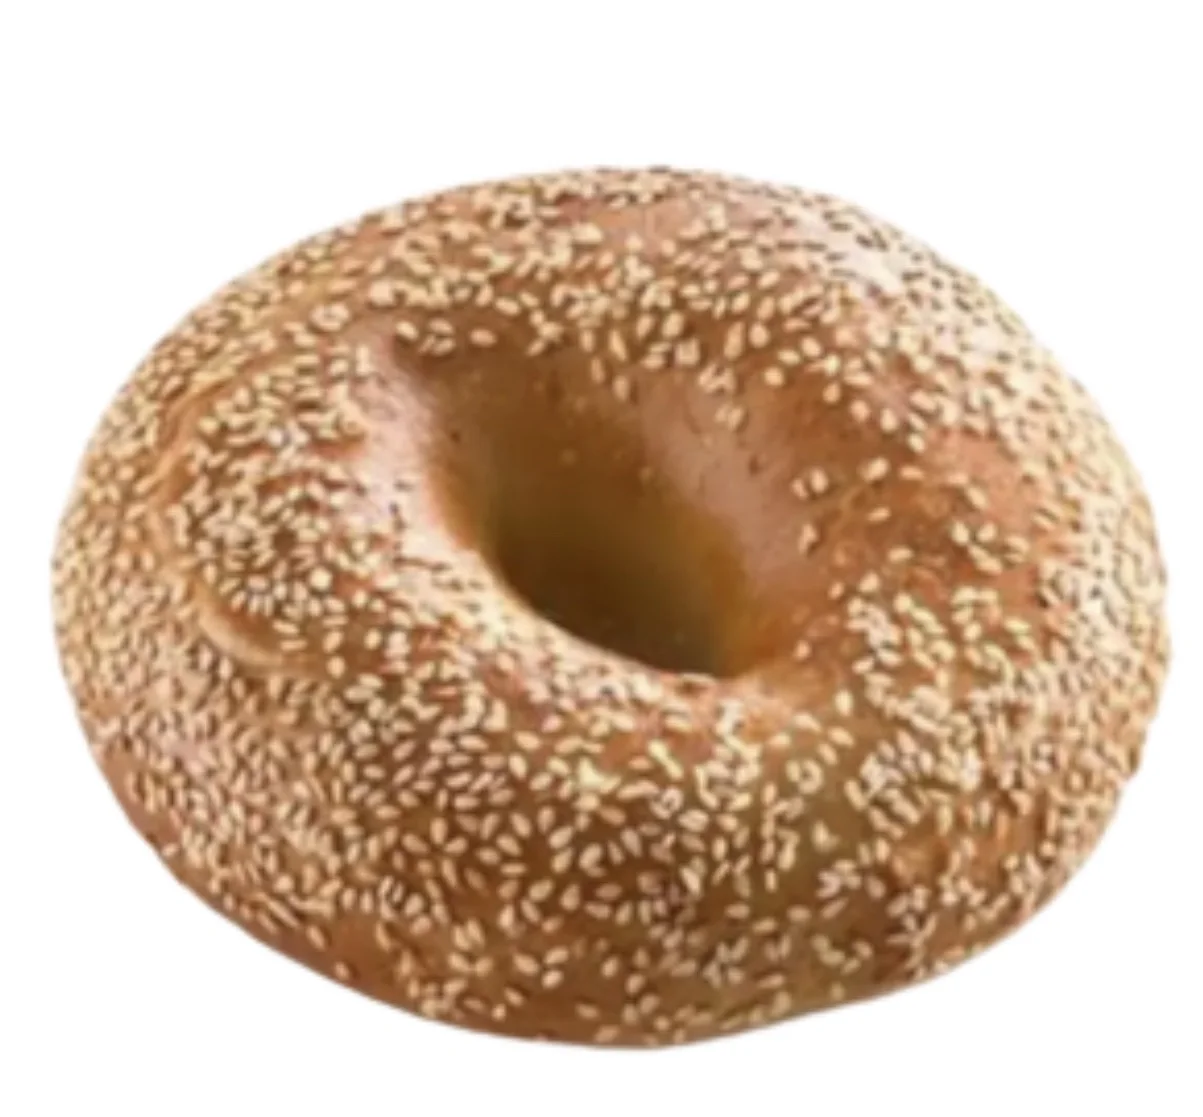 American Style Bagels (Sesame Topping) - 4 Bagels